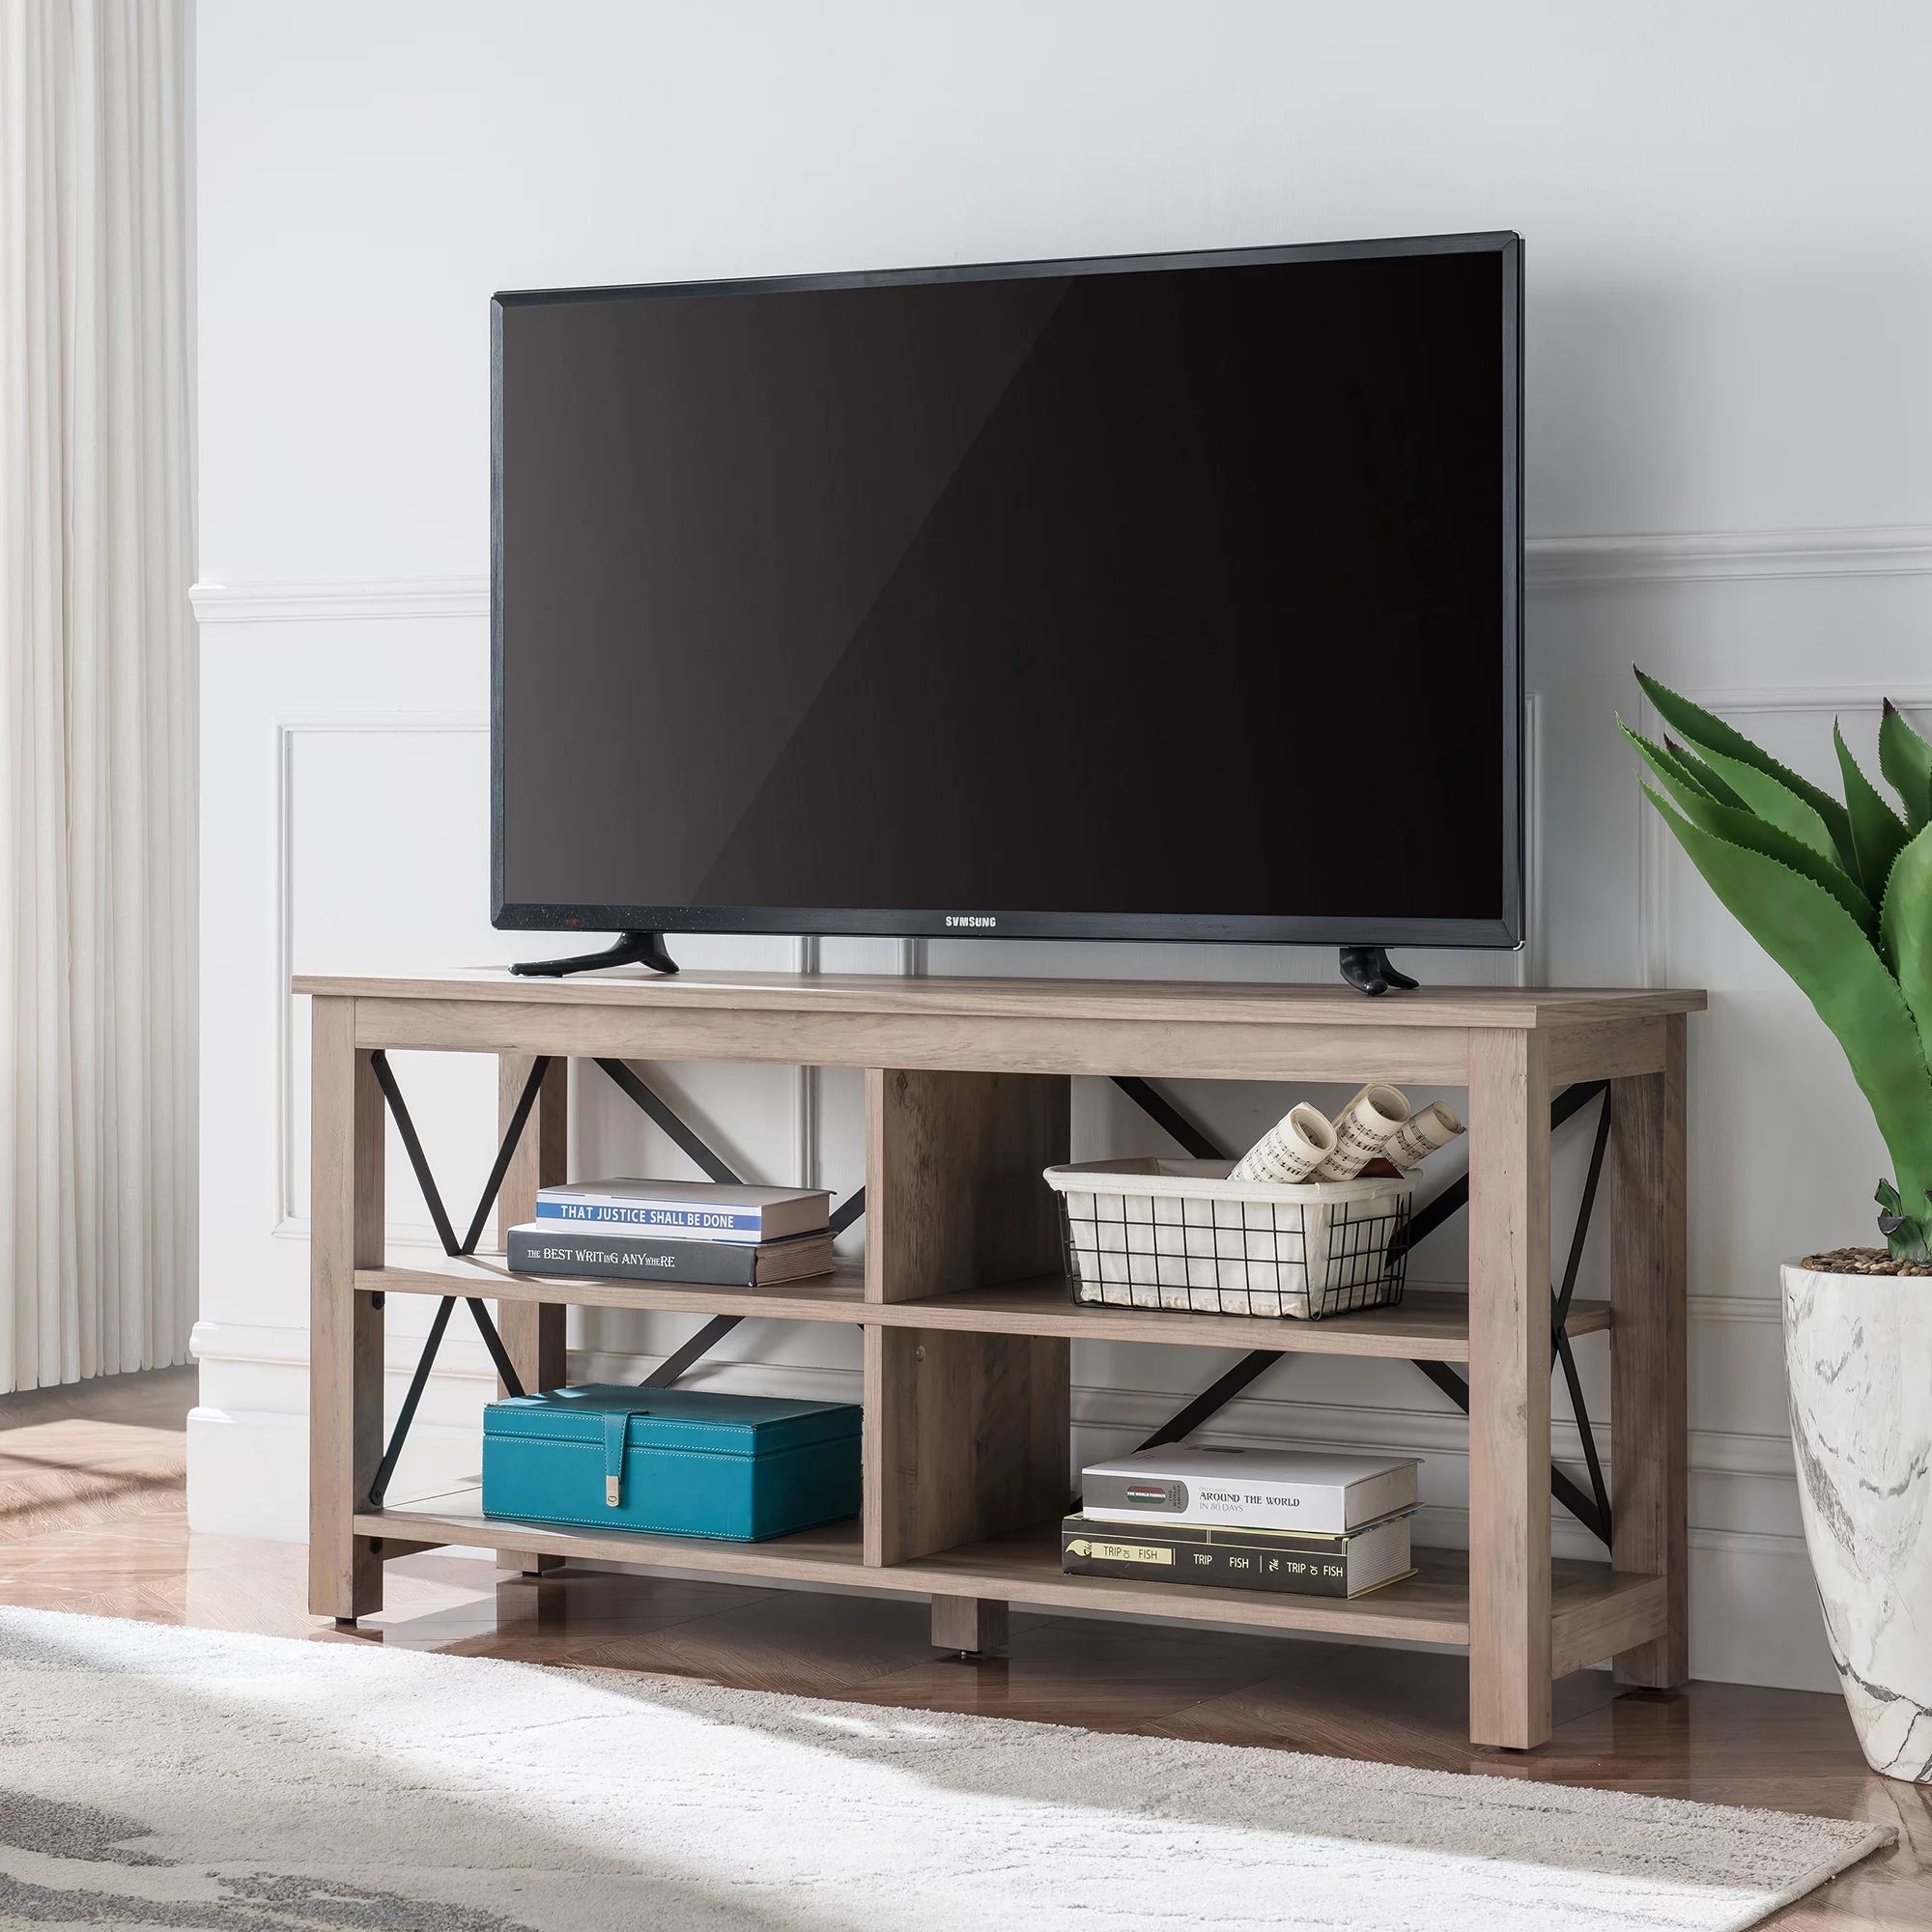 Evelyn&Zoe Modern Farmhouse Geometric TV Stand for TVs up to 55" | Walmart (US)